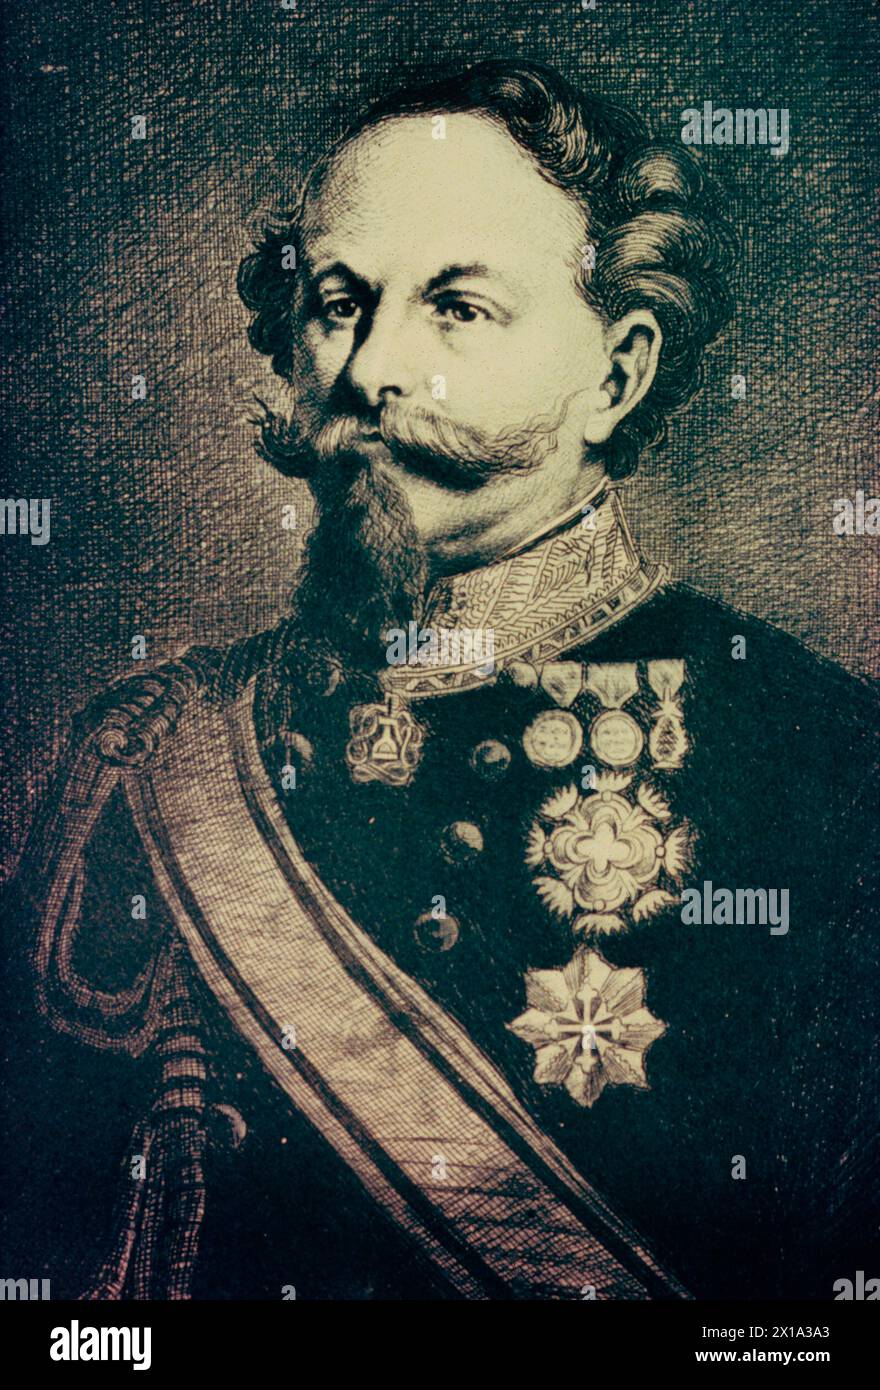 Victor Emmanuel II, King of Sardinia and later King of Italy, 1860s Stock Photo